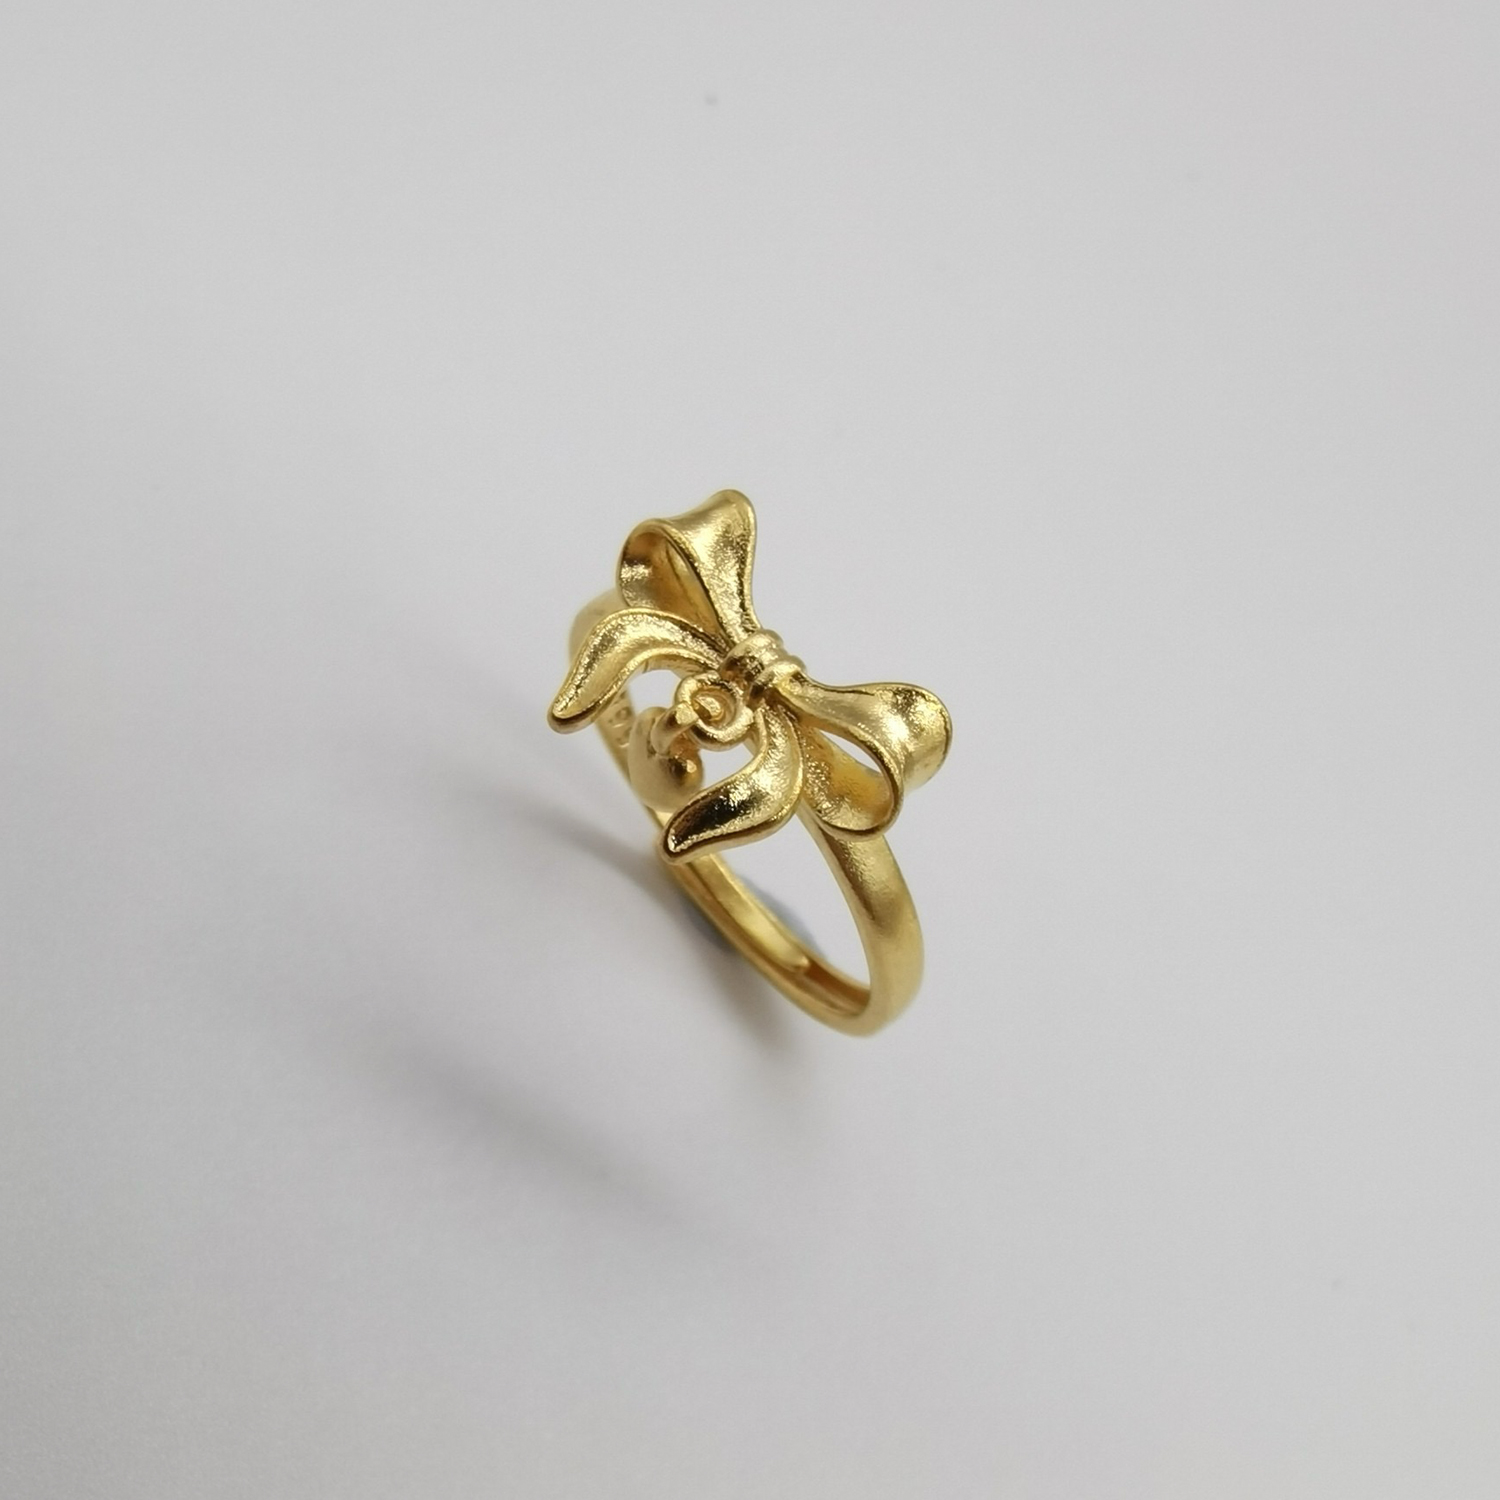 Alluvial gold vacuum electroplating 24K gold fugitive princess butterfly ring